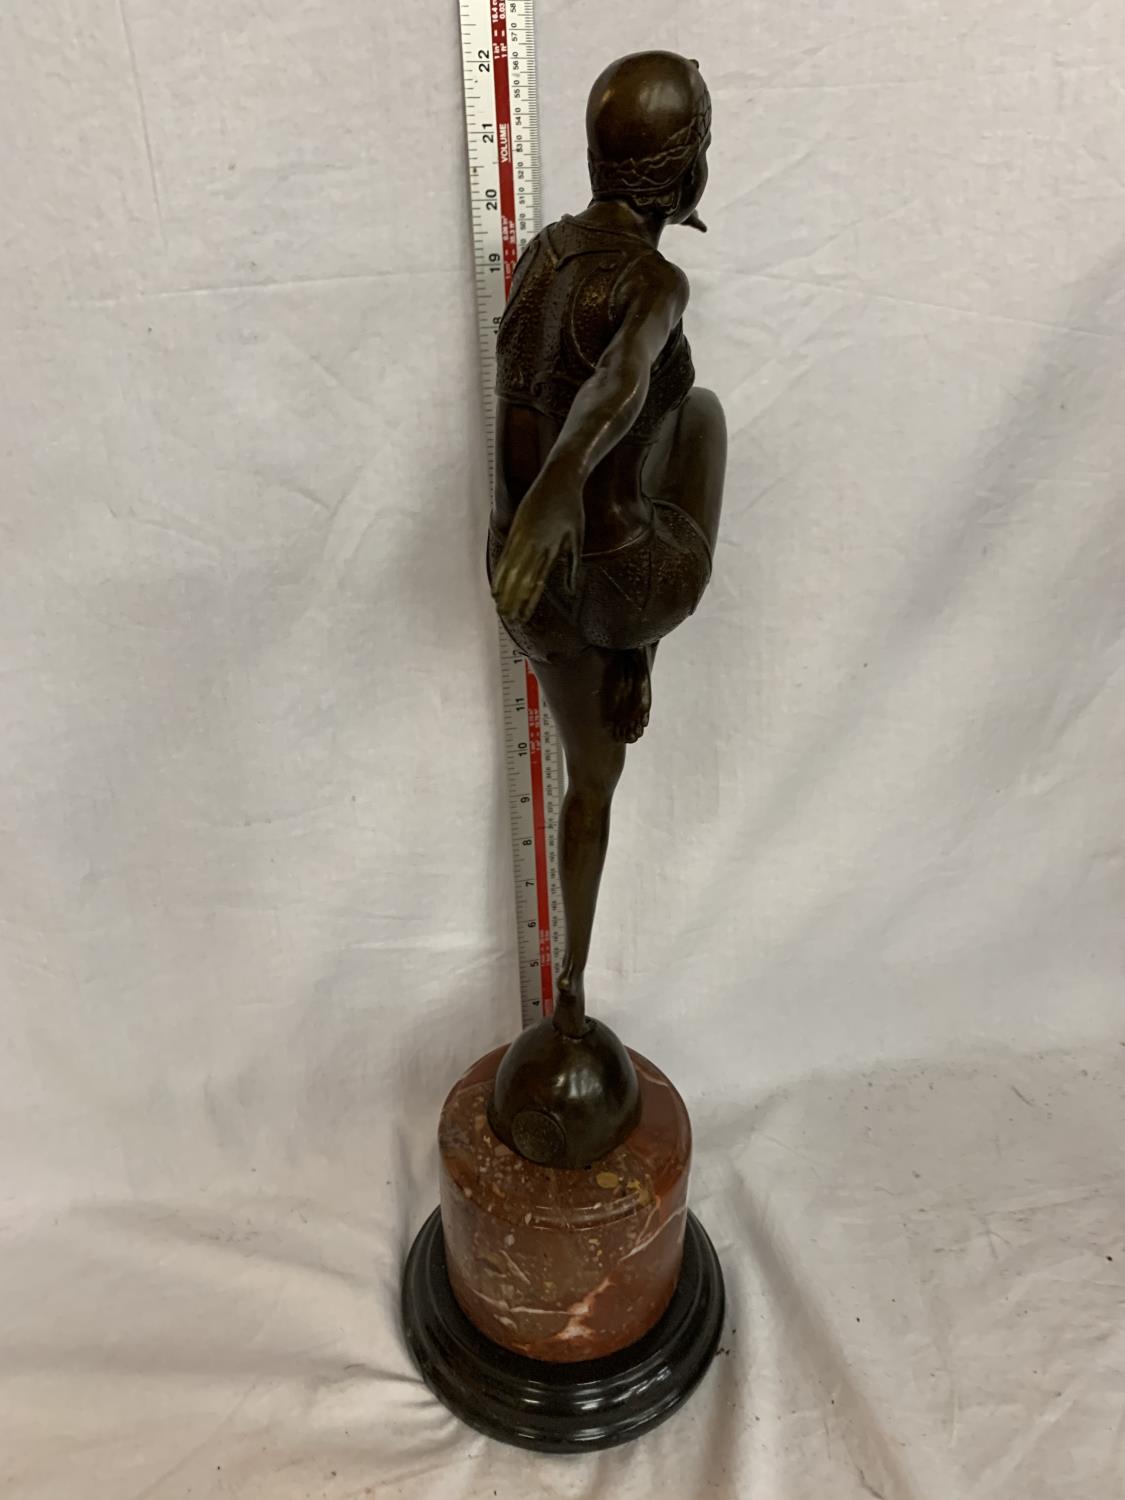 AN ART DECO STYLE BRONZE DANCING LADY ARMS OUT FIGURE ON A MARBLE BASE 52CM - Image 3 of 6